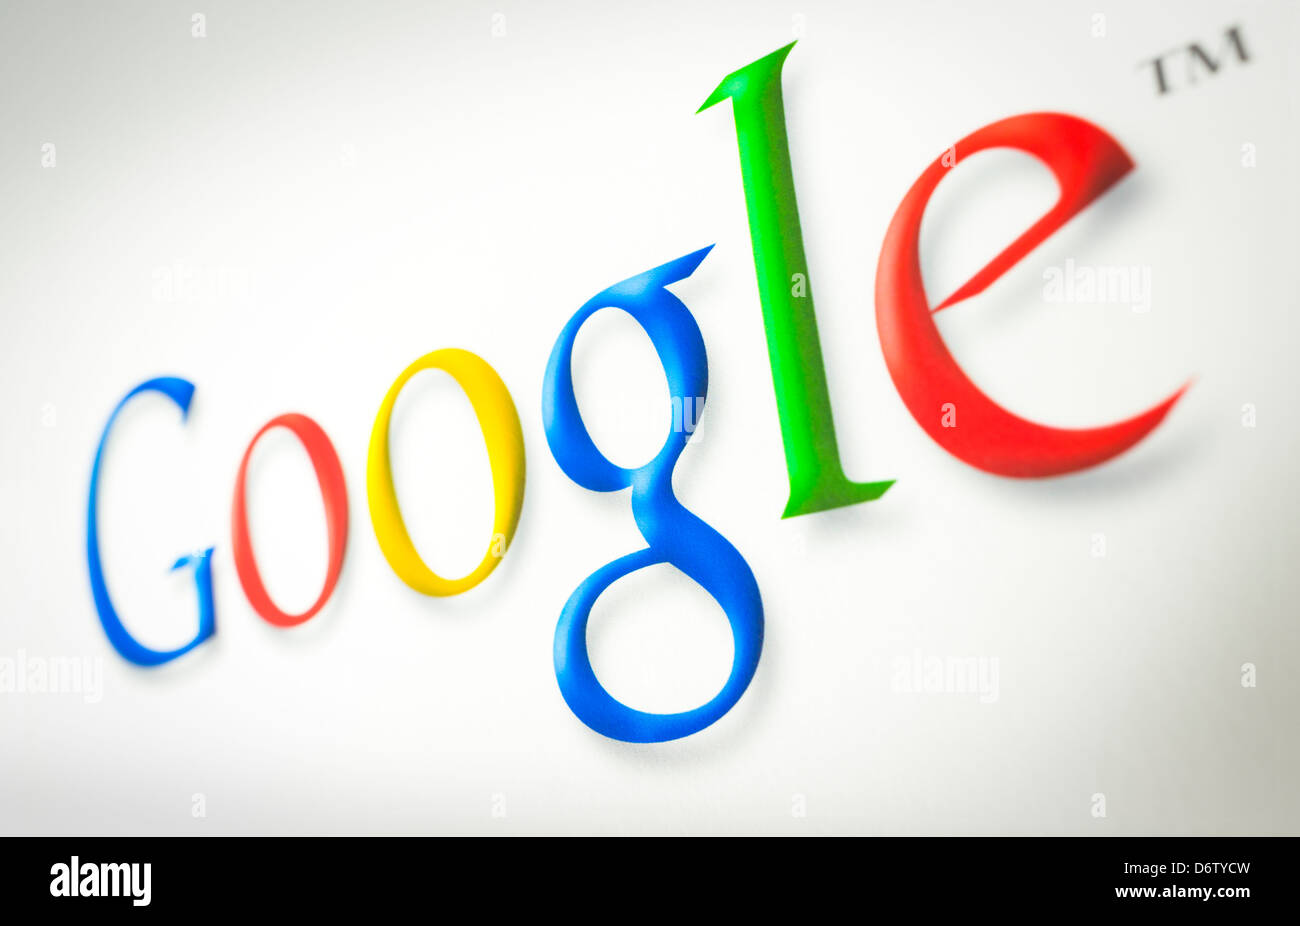 Google's Logo on their search engine website. Stock Photo